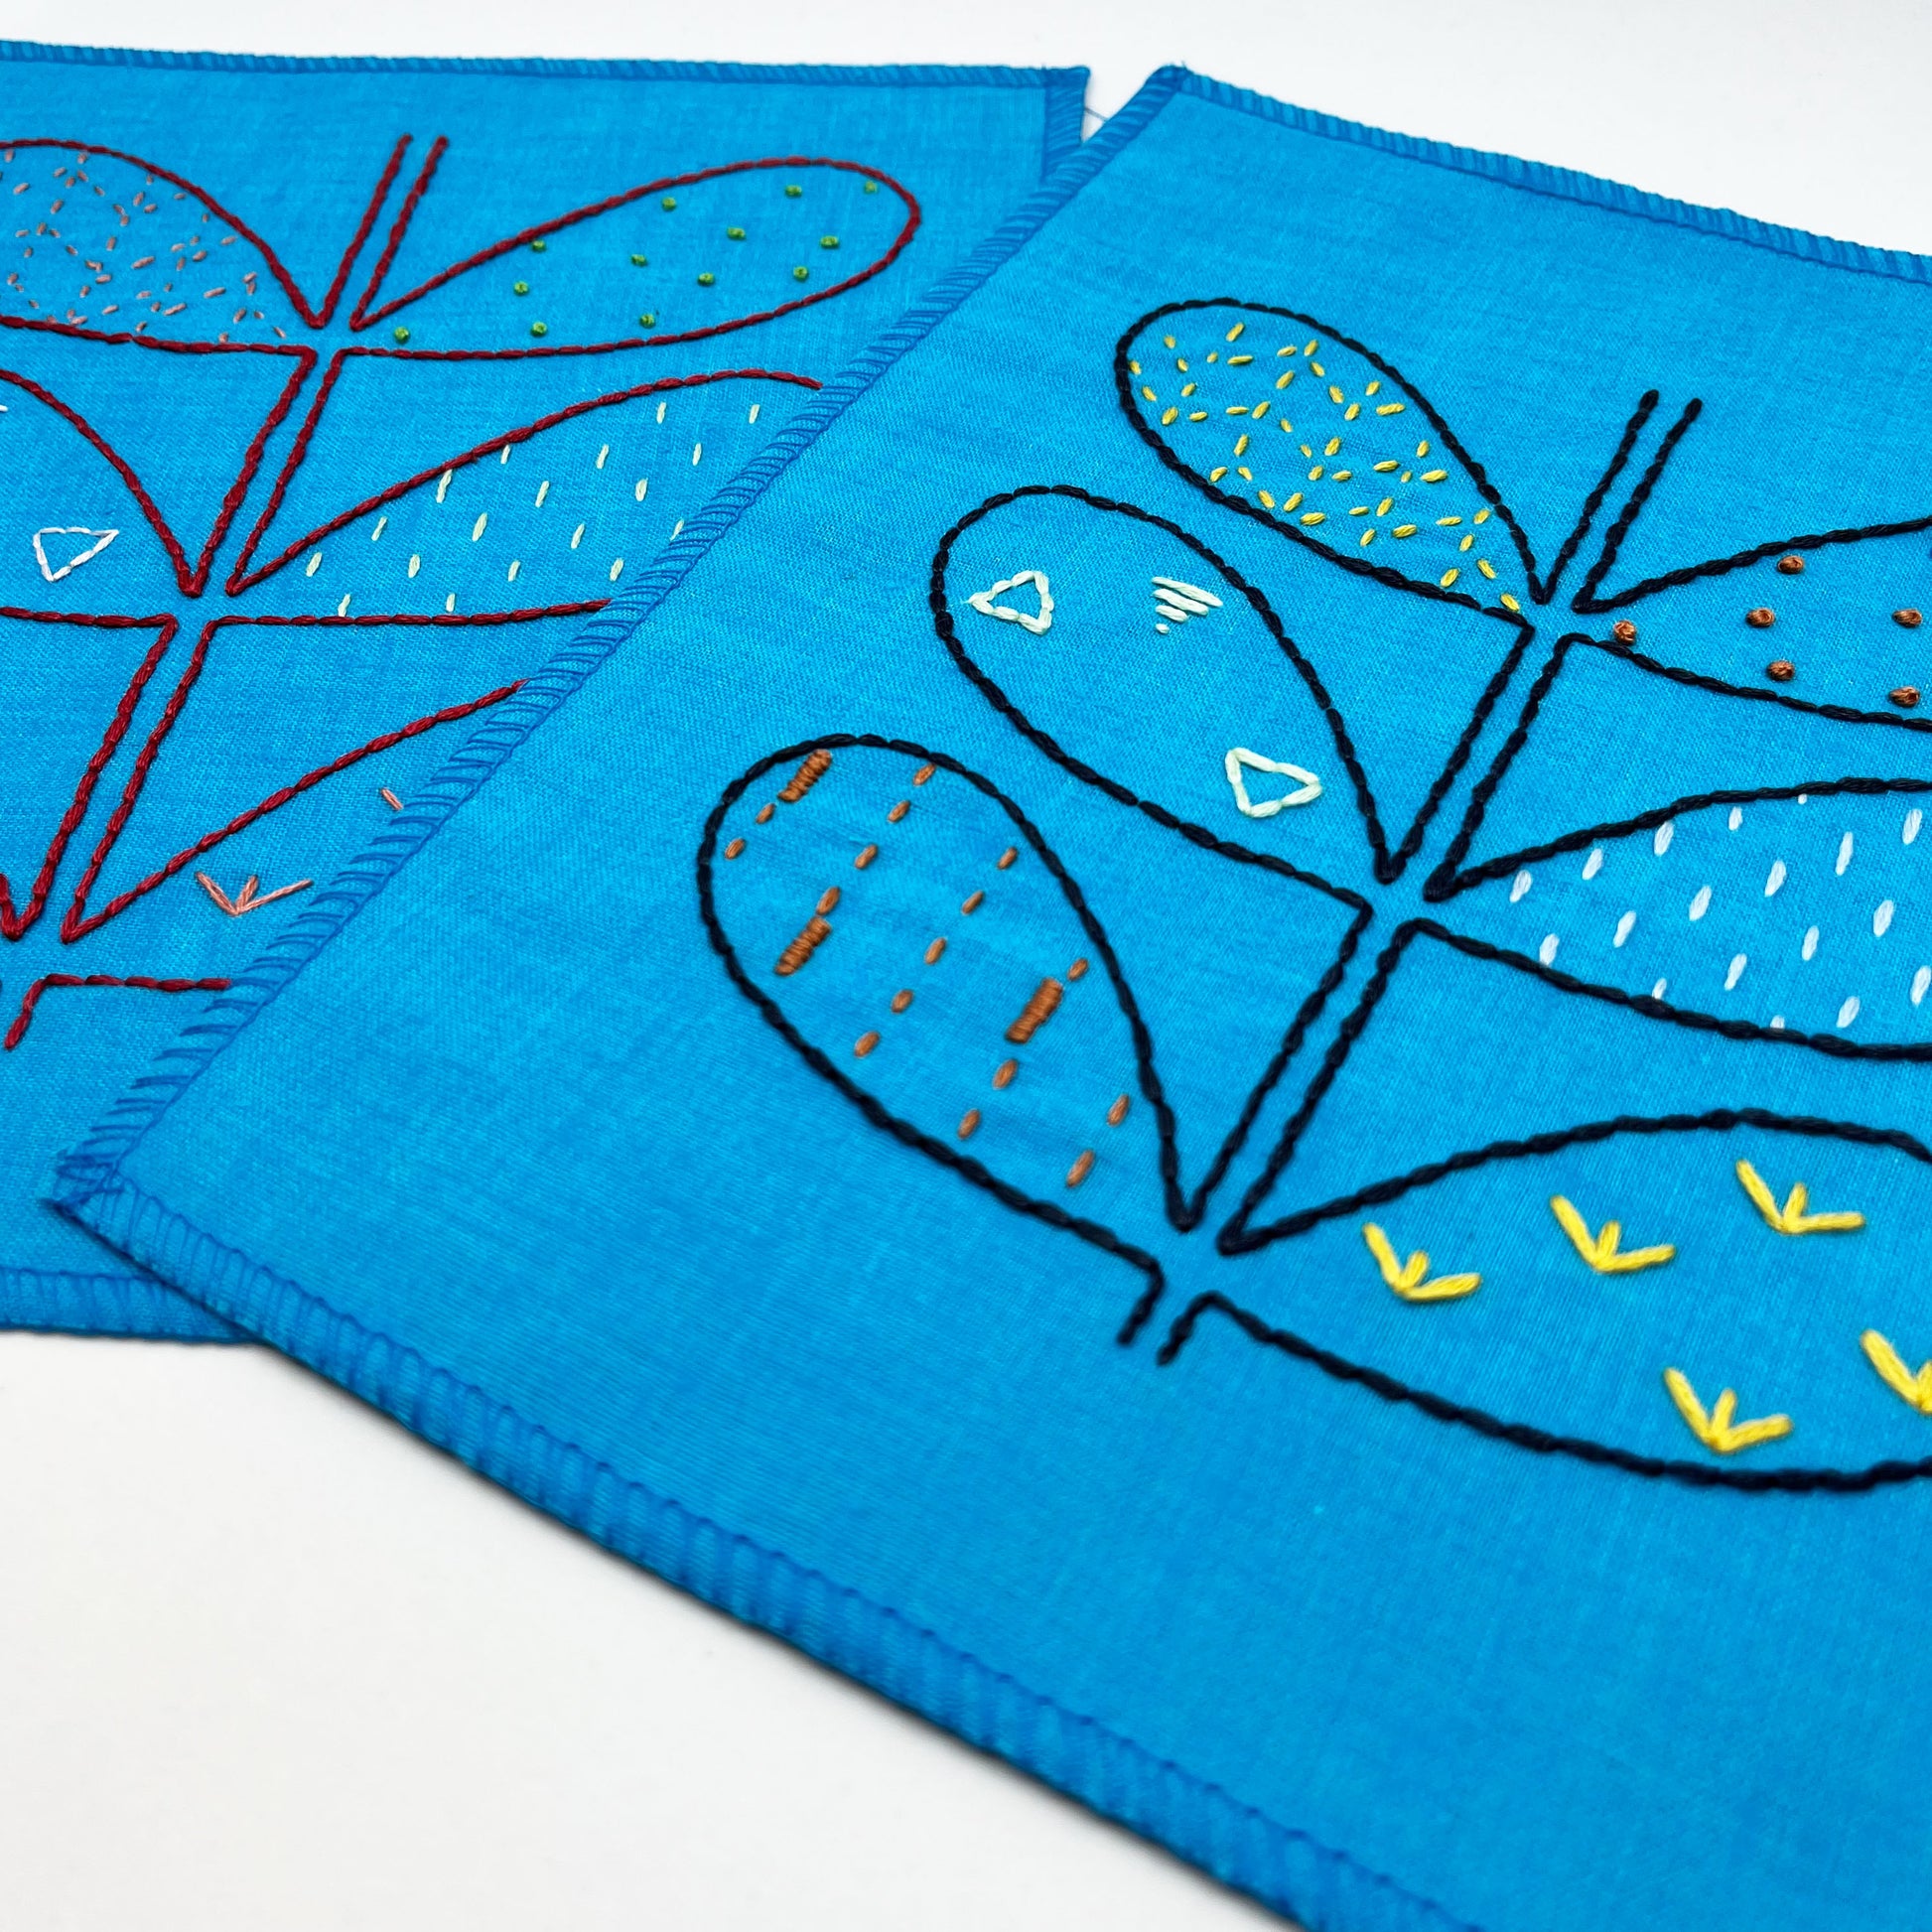 two small bright blue fabric wall hangings, hand embroidered with the outline of symmetrical petals on a stem, each petal filled with different stitches like french knots, running stitches and triangles, in different colors, on a white background